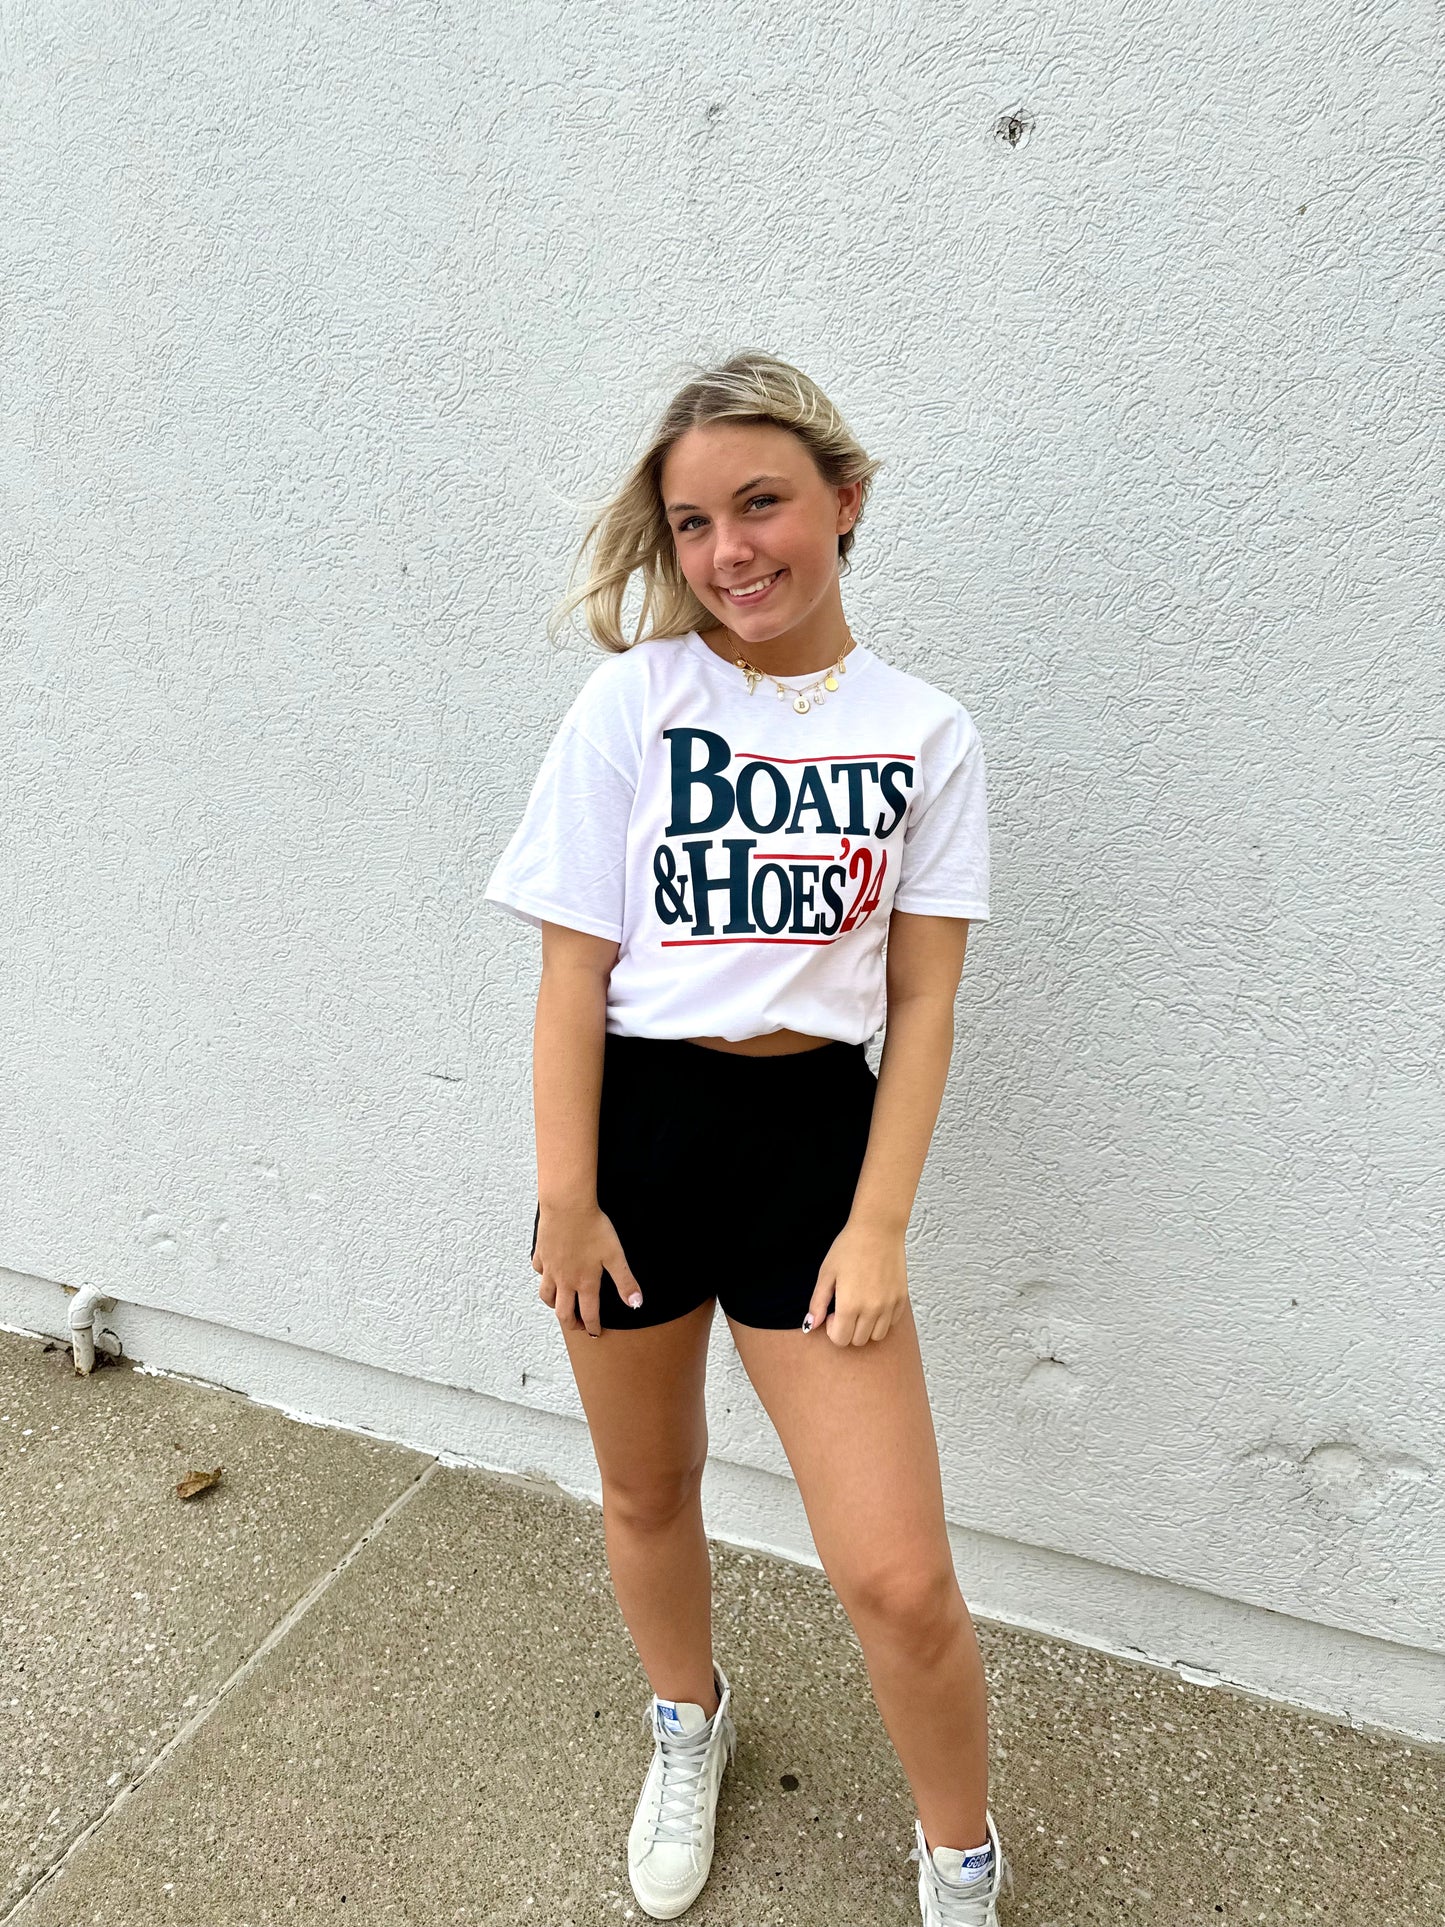 Boats and Hoes 24' Graphic Tee